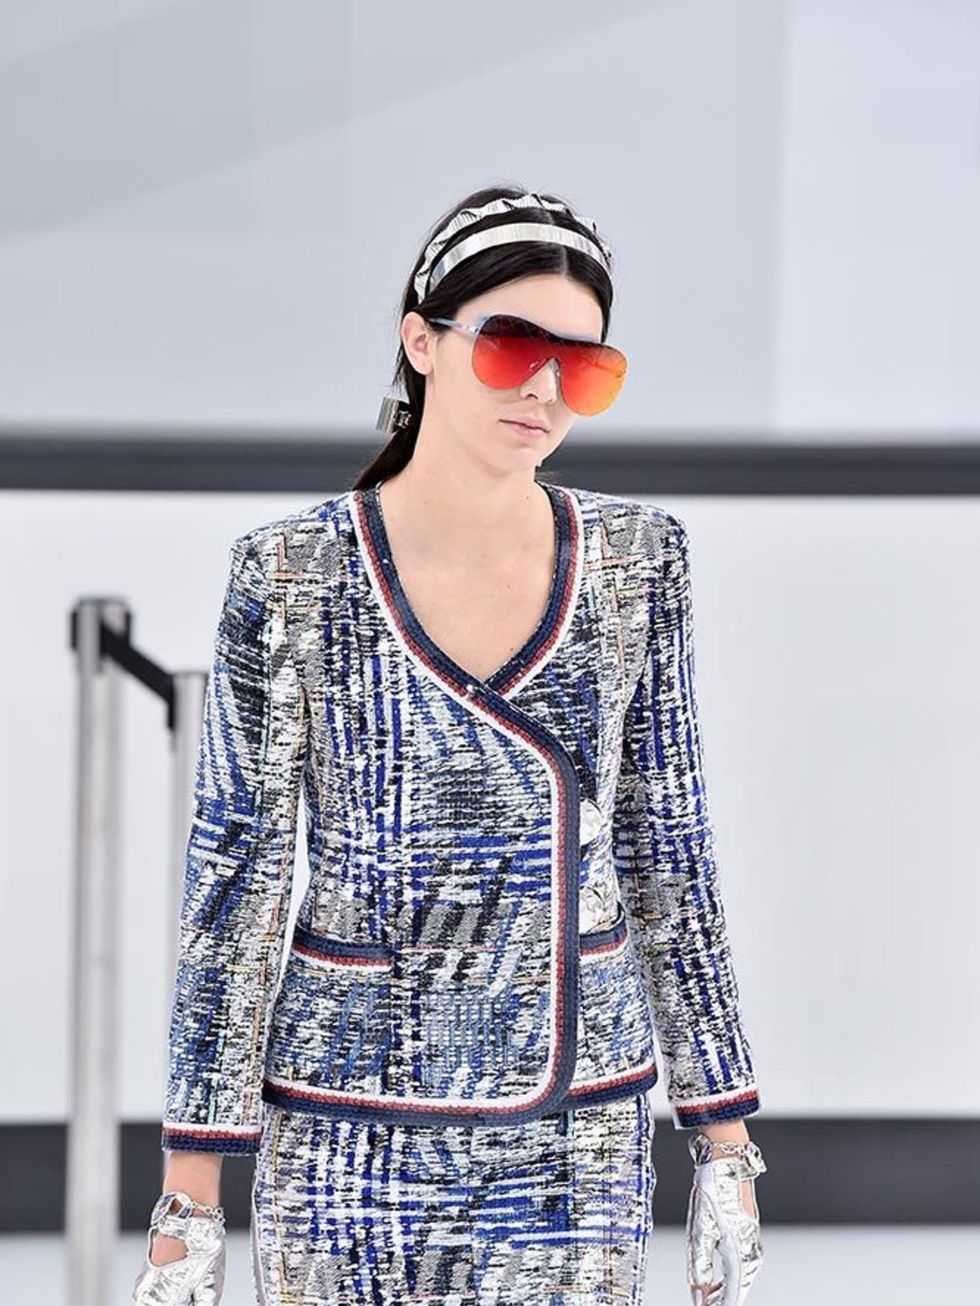 Kendall Jenner on the Chanel catwalk during Paris Fashion Week, September 2015